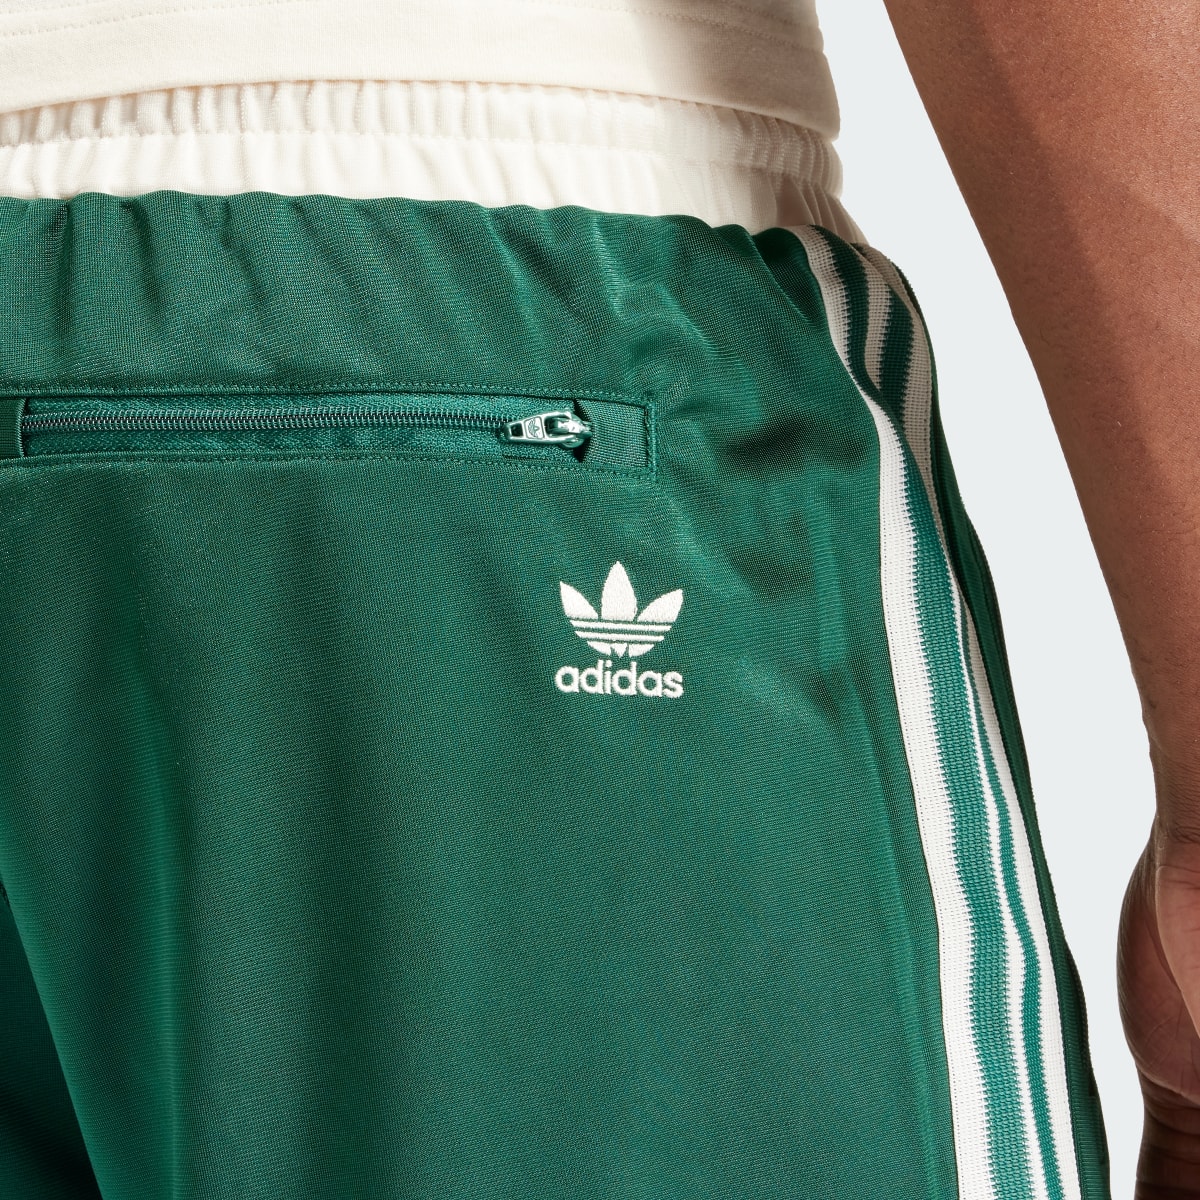 Adidas Track Tracksuit Bottoms. 7